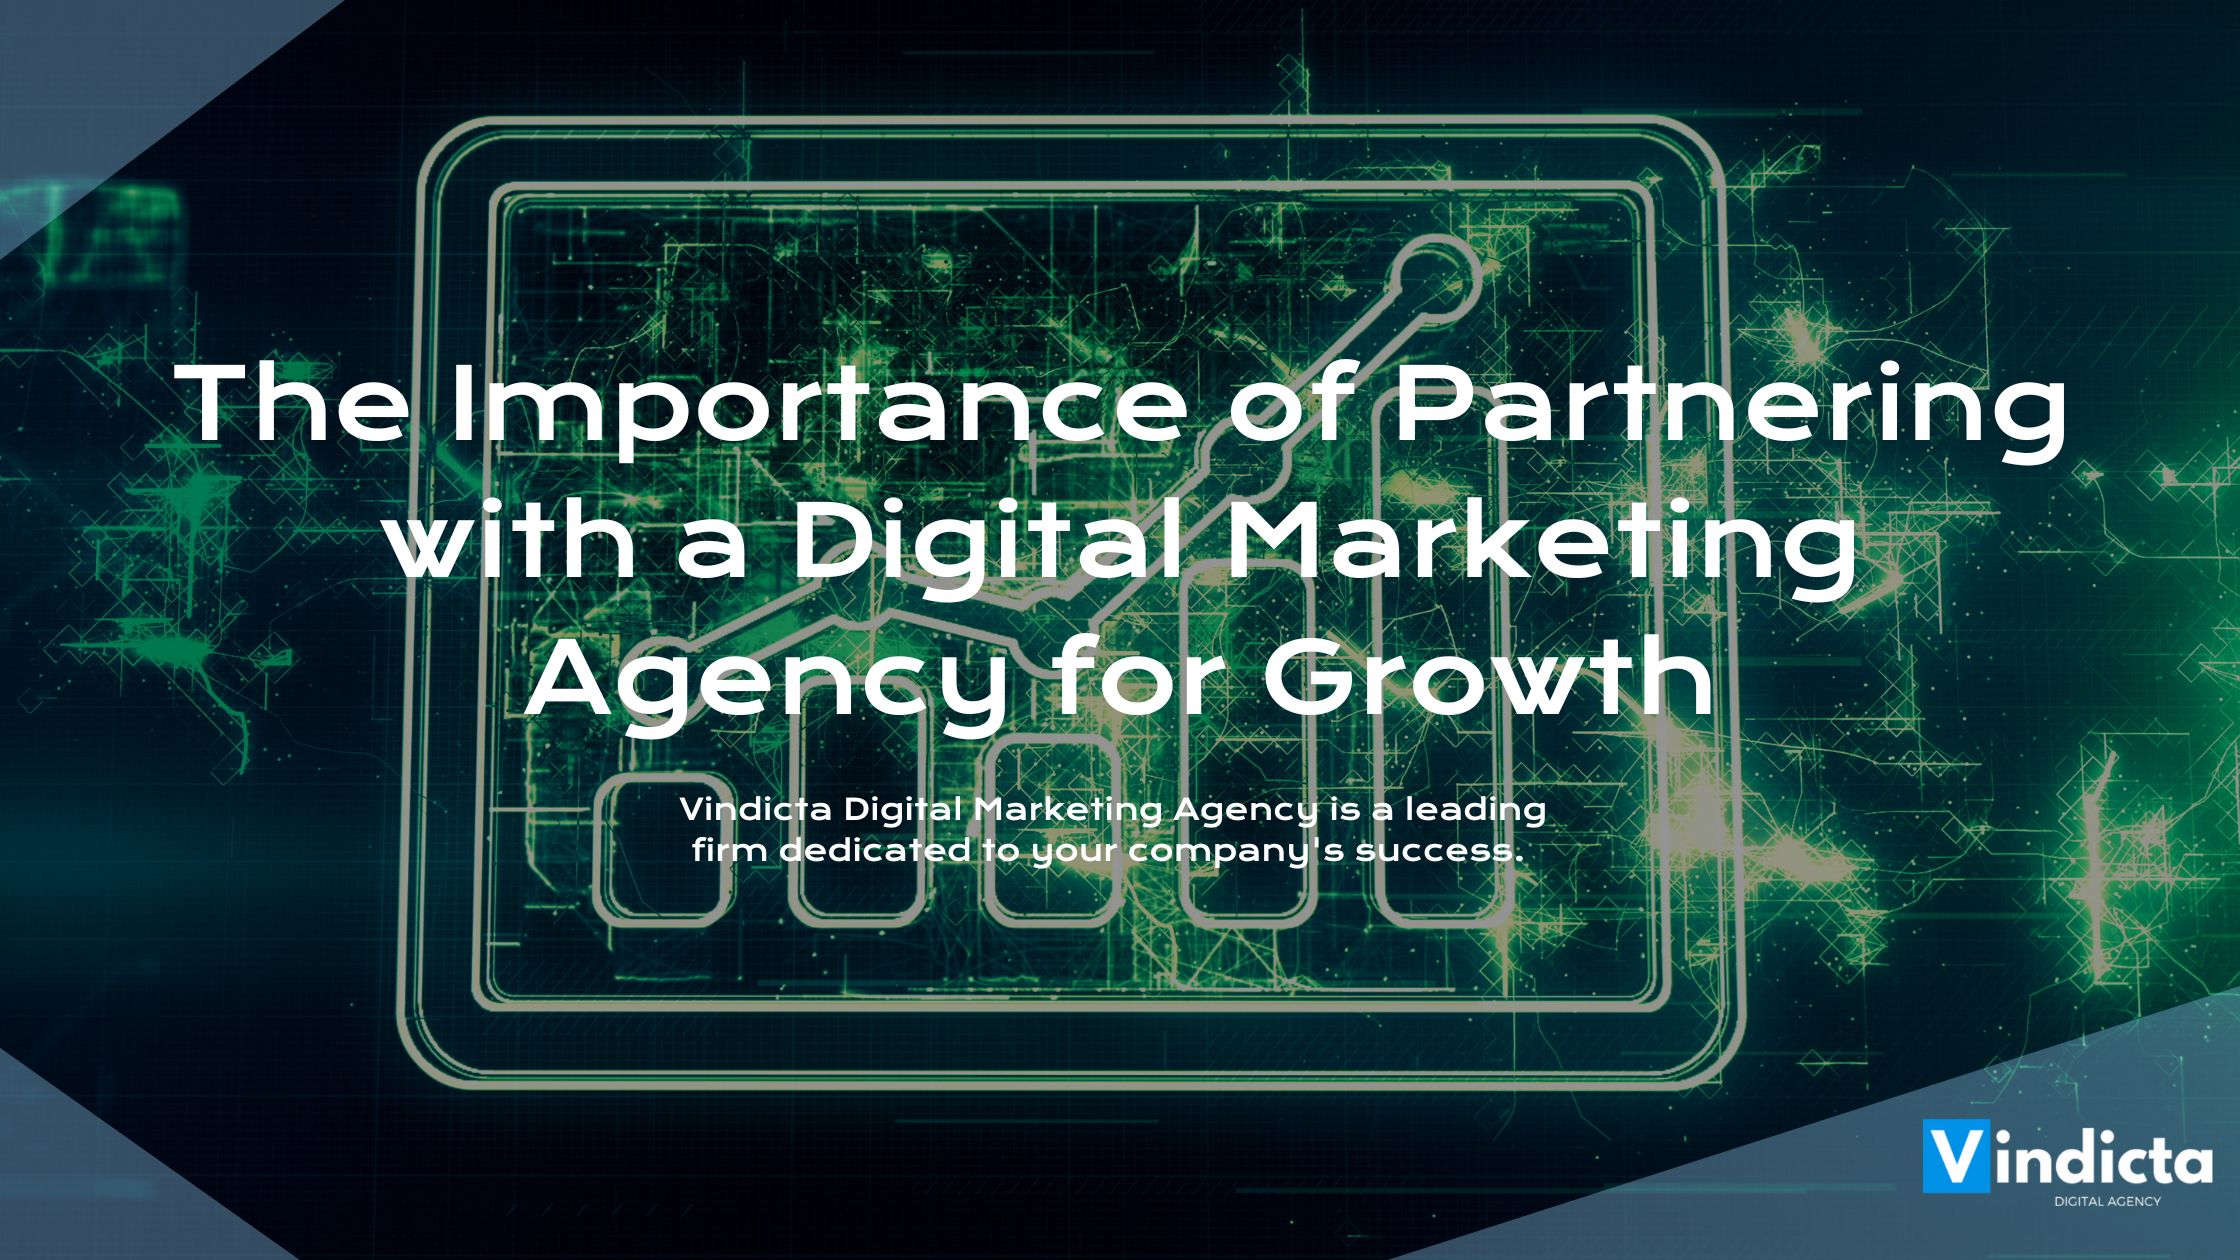 The Importance of Partnering with a Digital Marketing Agency for Growth